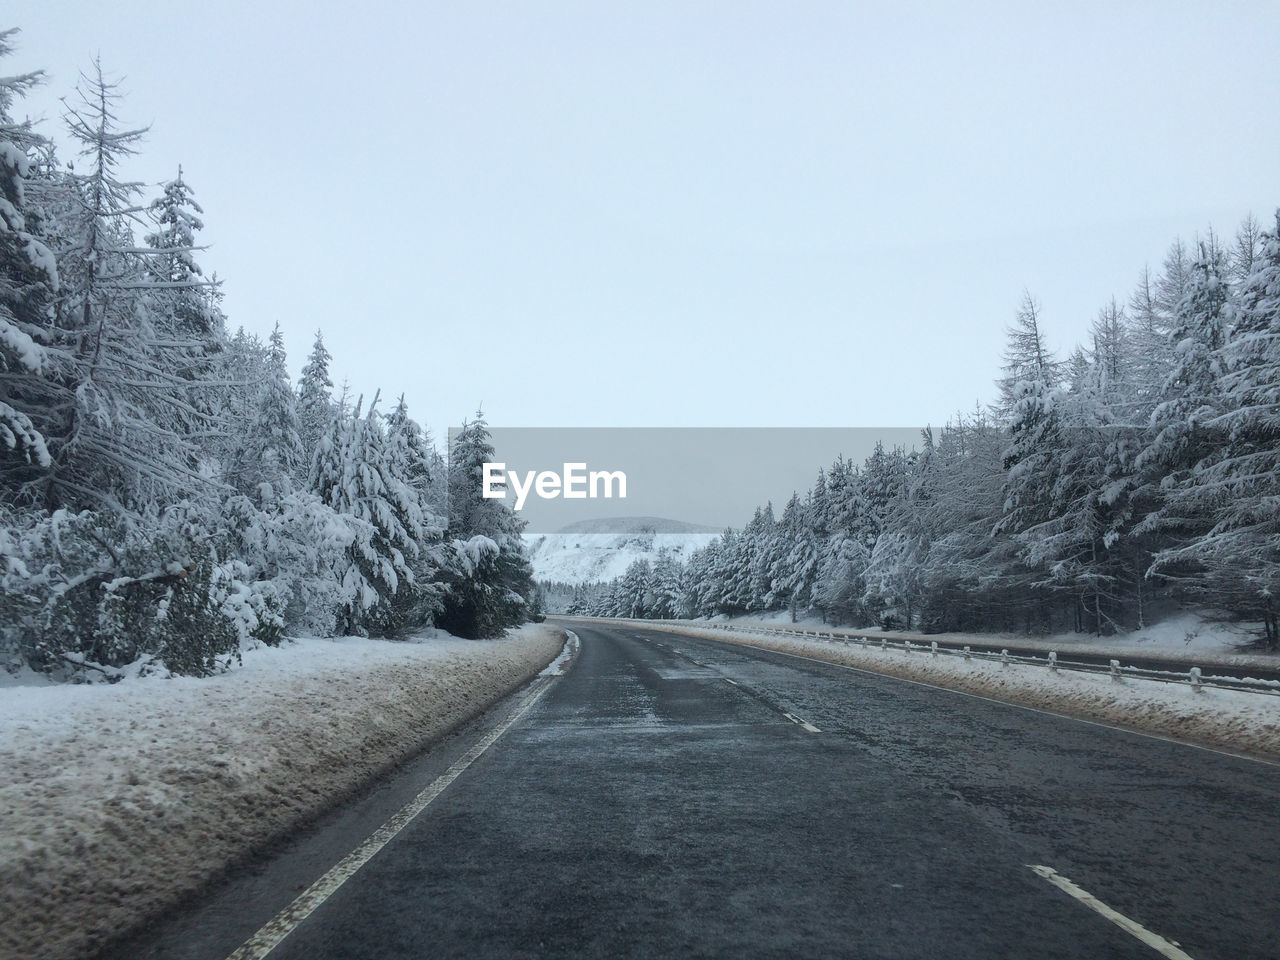 Road passing along snow covered forest